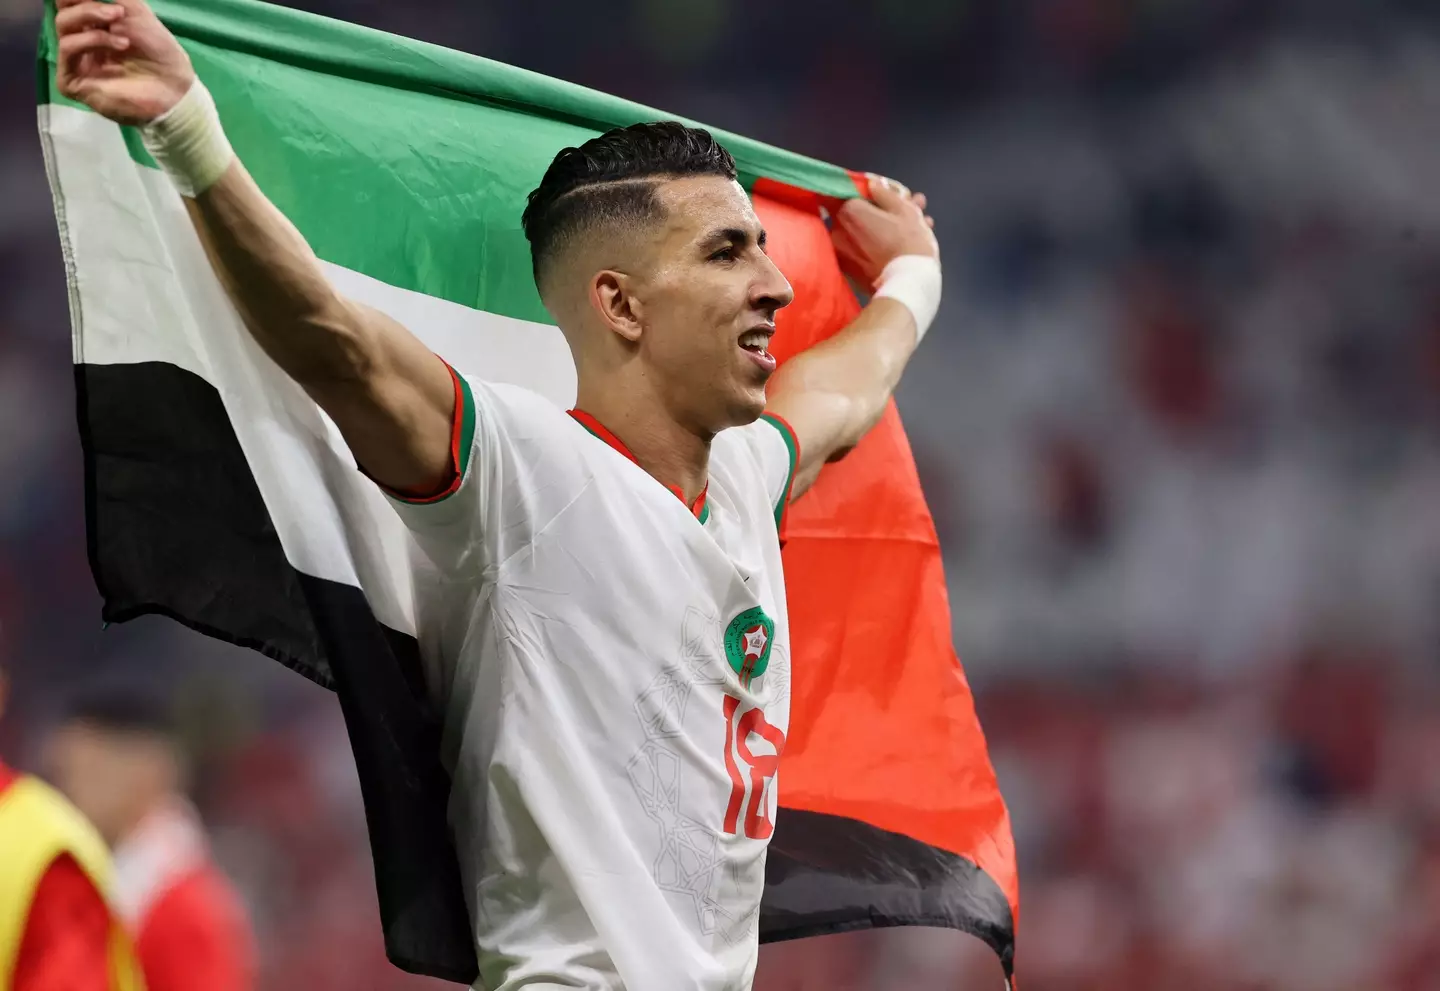 Morocco's Jawad El Yamiq with a Palestine flag during the World Cup. Image: Alamy